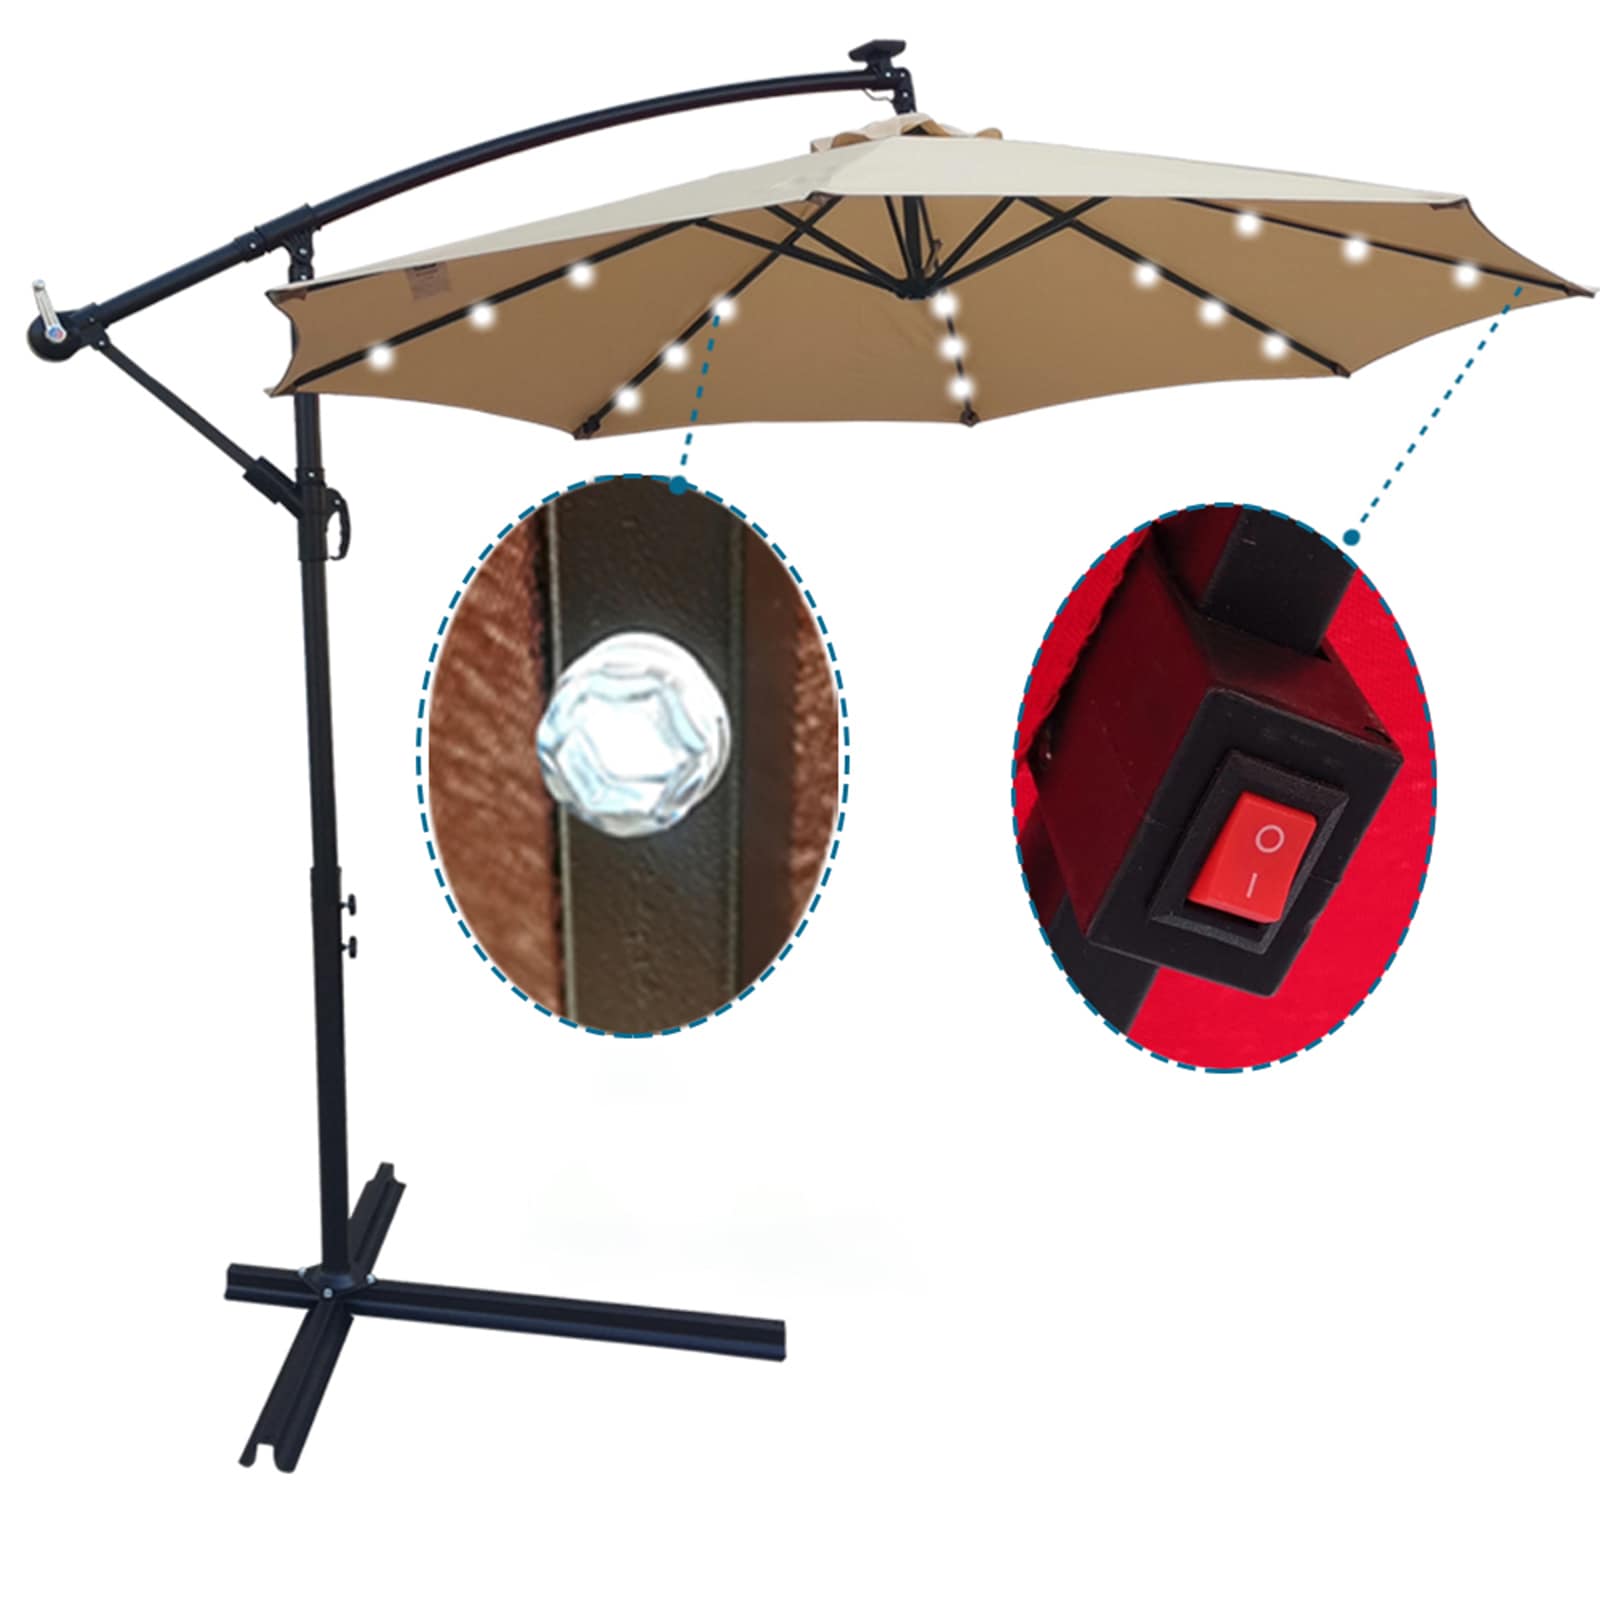 Flynama 10-ft Solar Powered Cantilever Patio Umbrella with Base in the ...